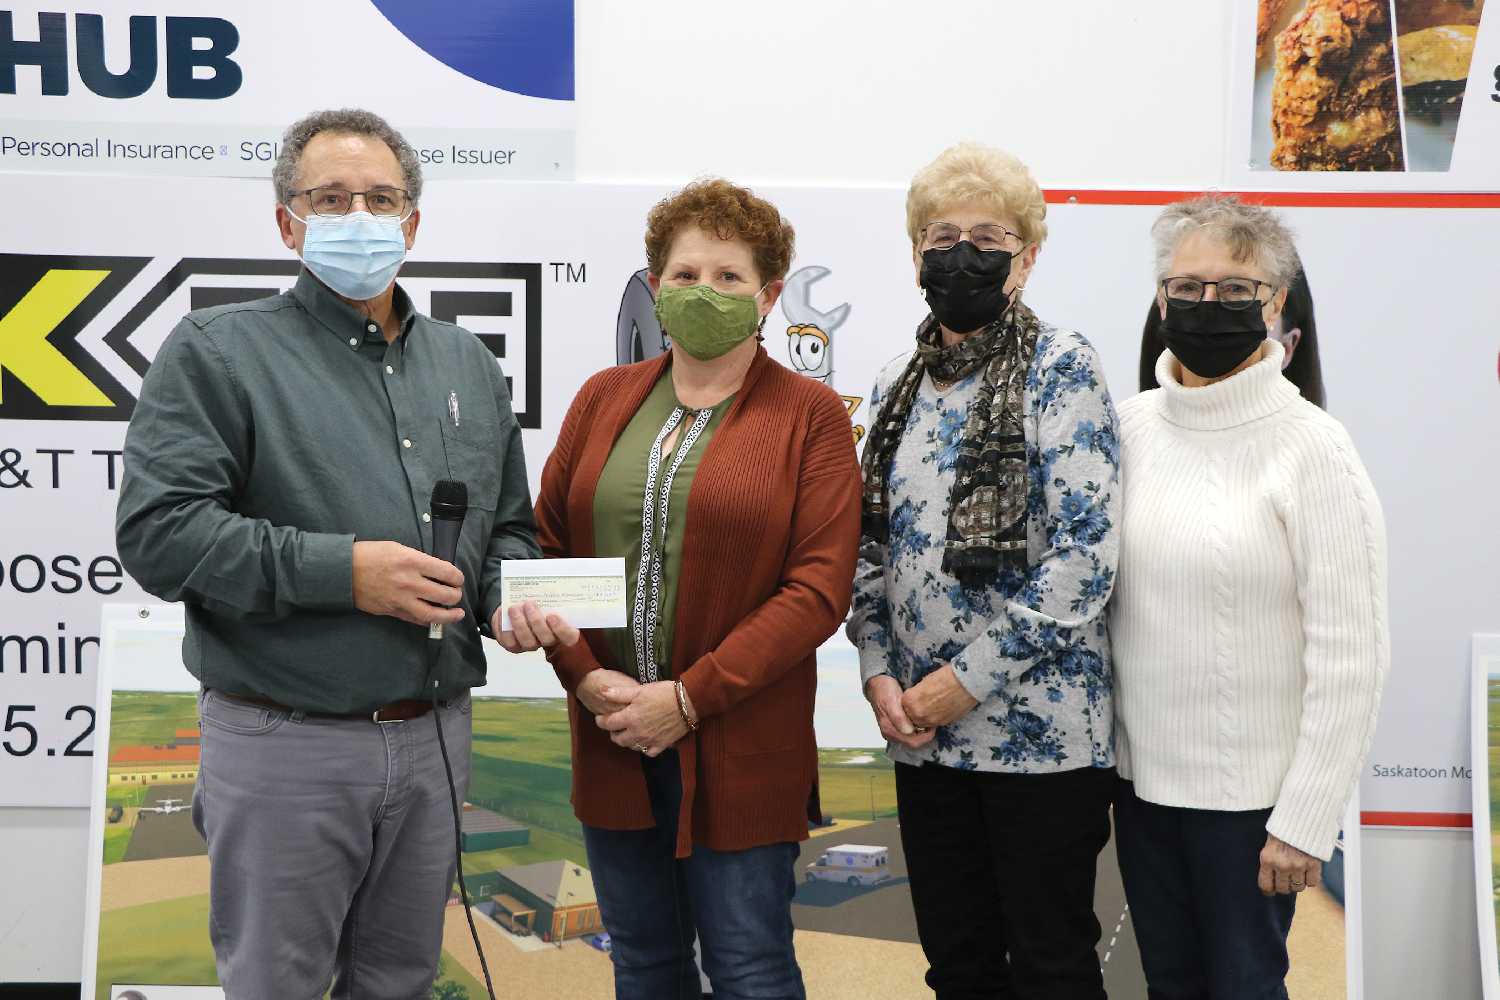 Jeff St. Onge accepting a $10,000 donation for the Moosomin airport project from Moosomin Thrift Store board members Lori Shepherd, Marilyn Klinger and Beryl Stewart.